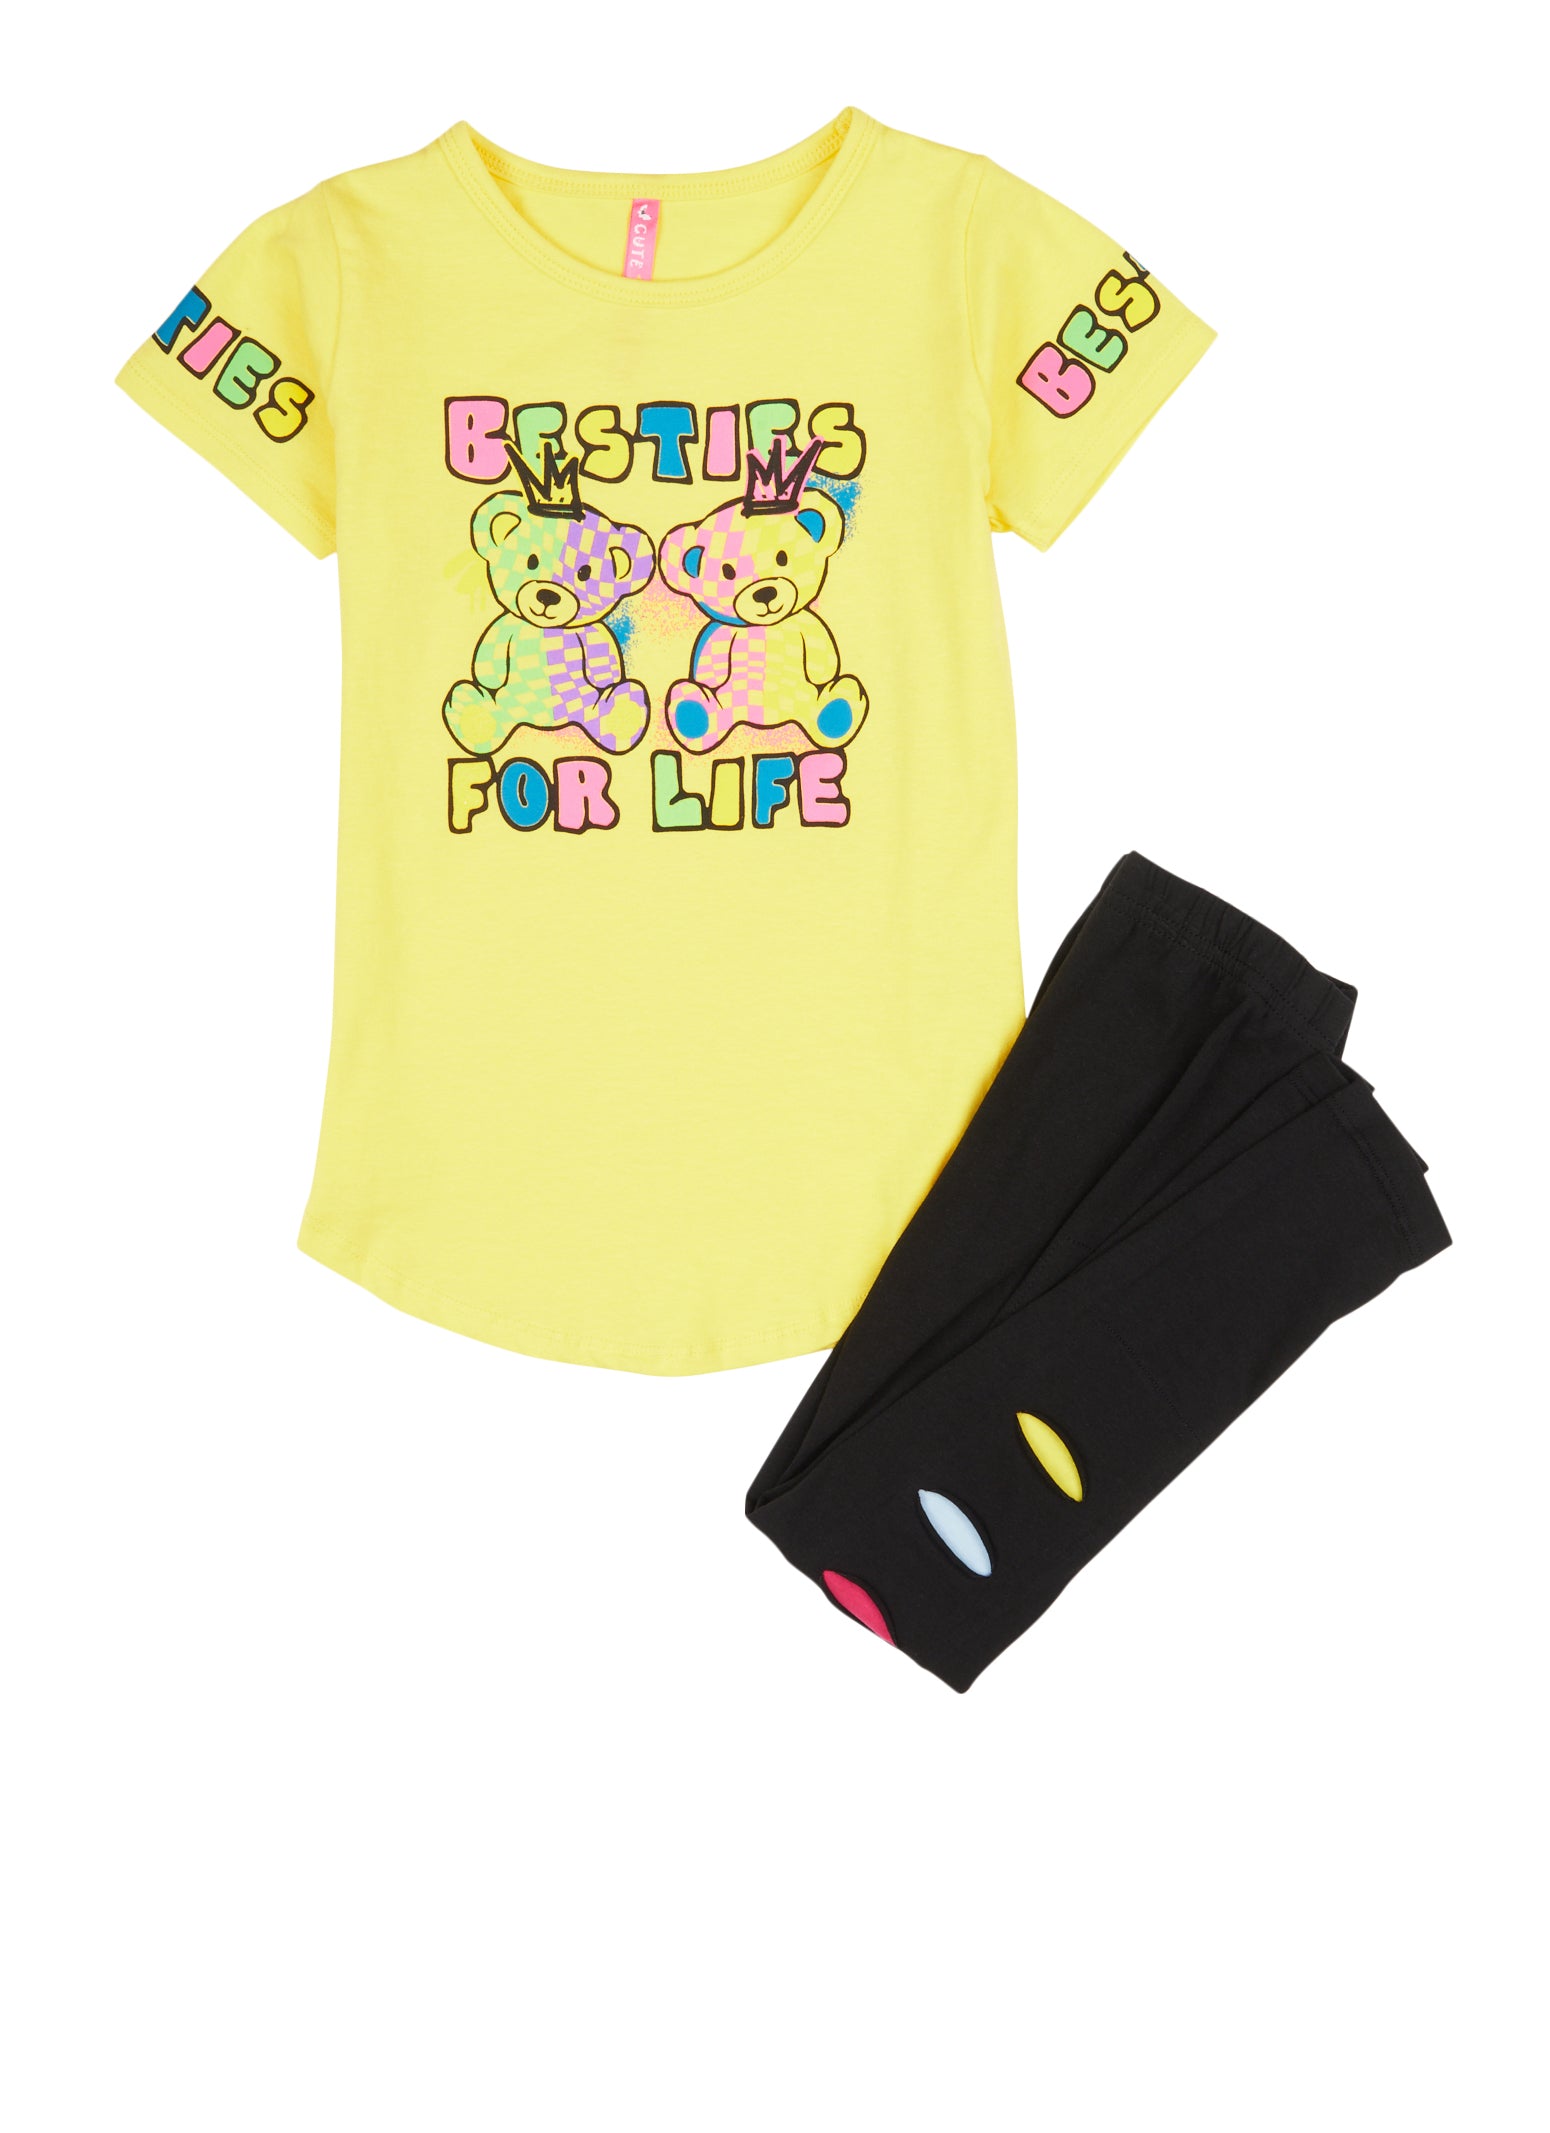 Little Girls Besties For Life Graphic Tee and Laser Cut Leggings - White